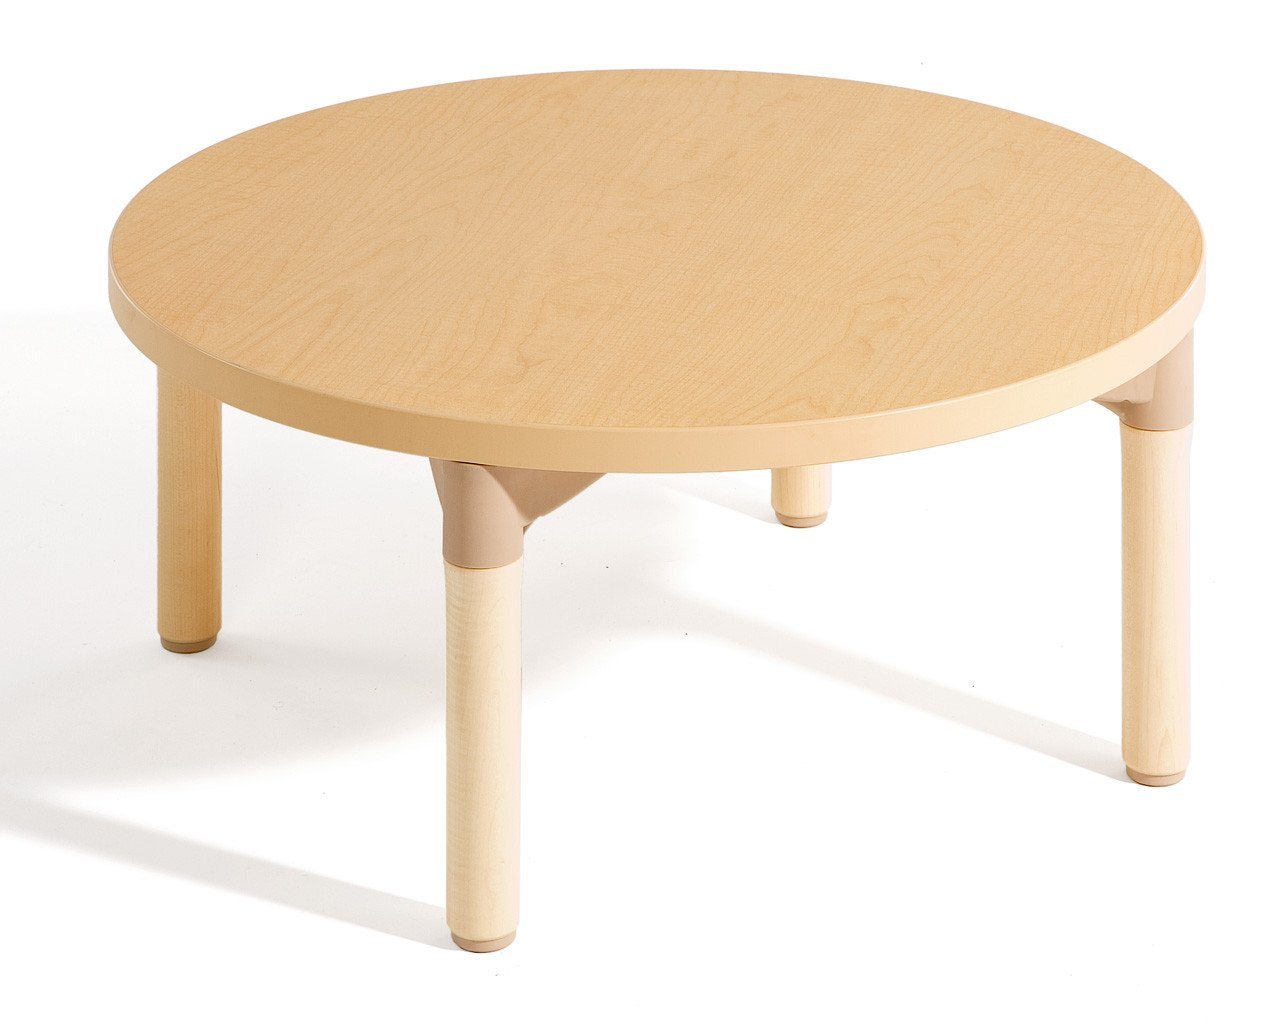 36" Classroom Round Table by Community Playthings - louisekool